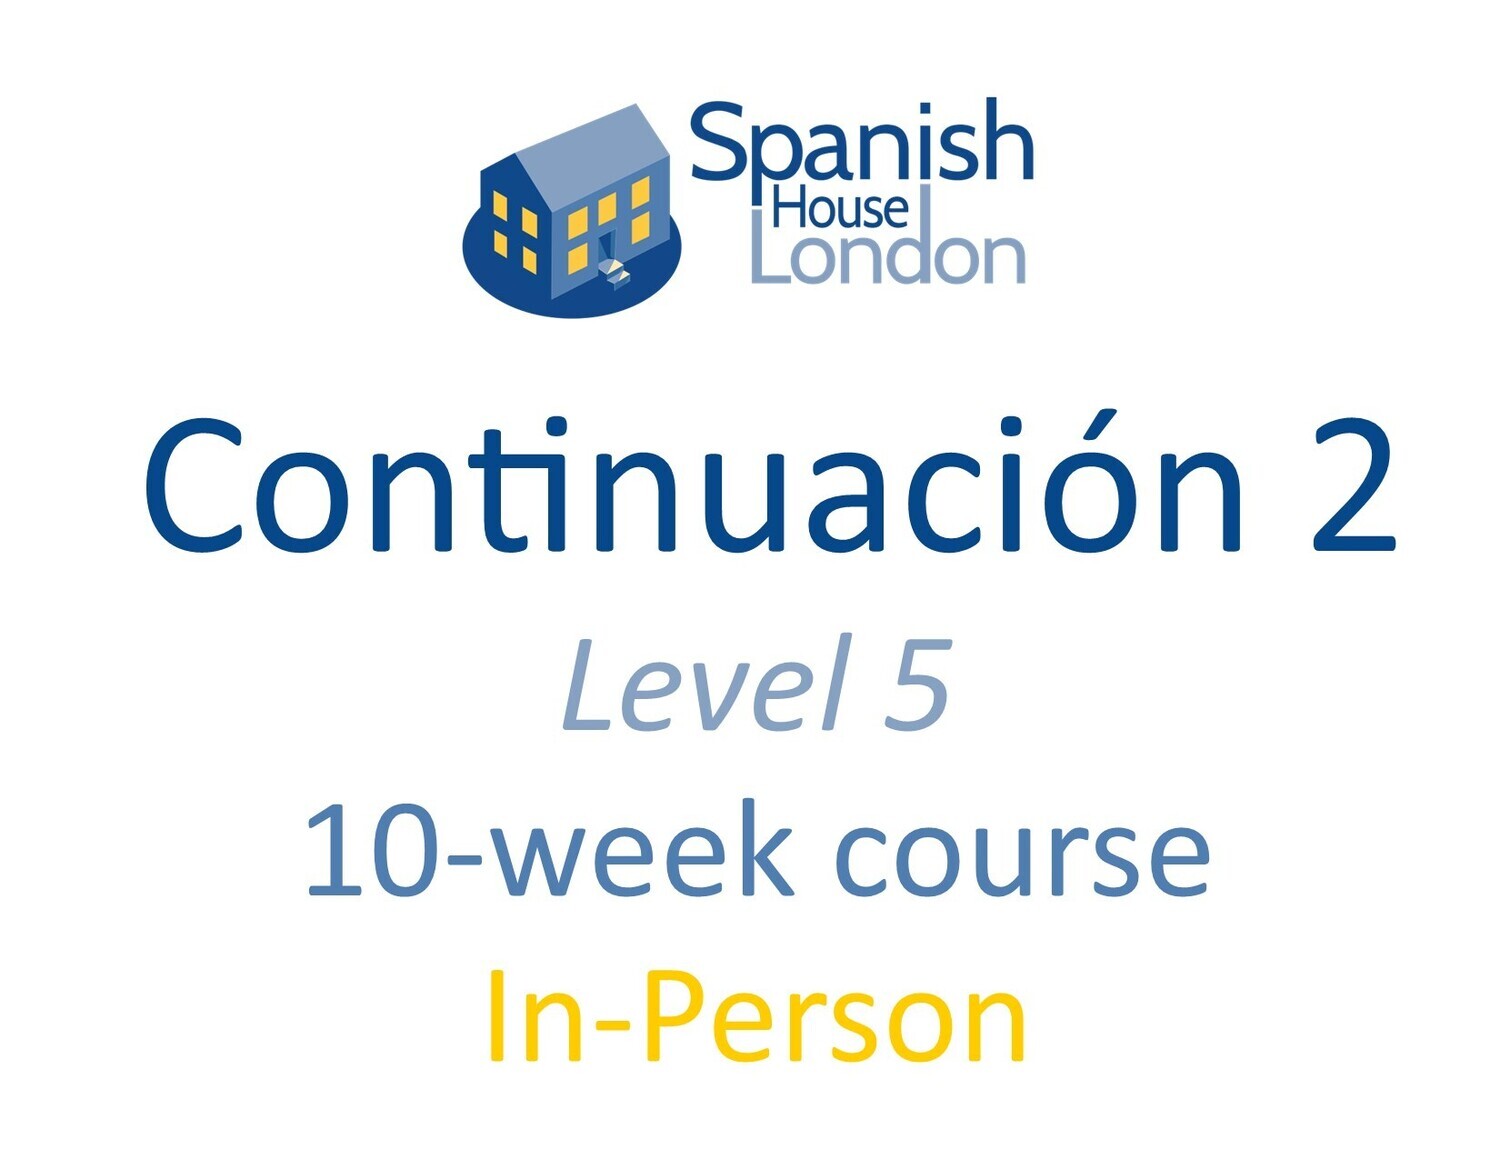 Continuacion 2 Course starting on 4th May at 6pm in Euston / King's Cross